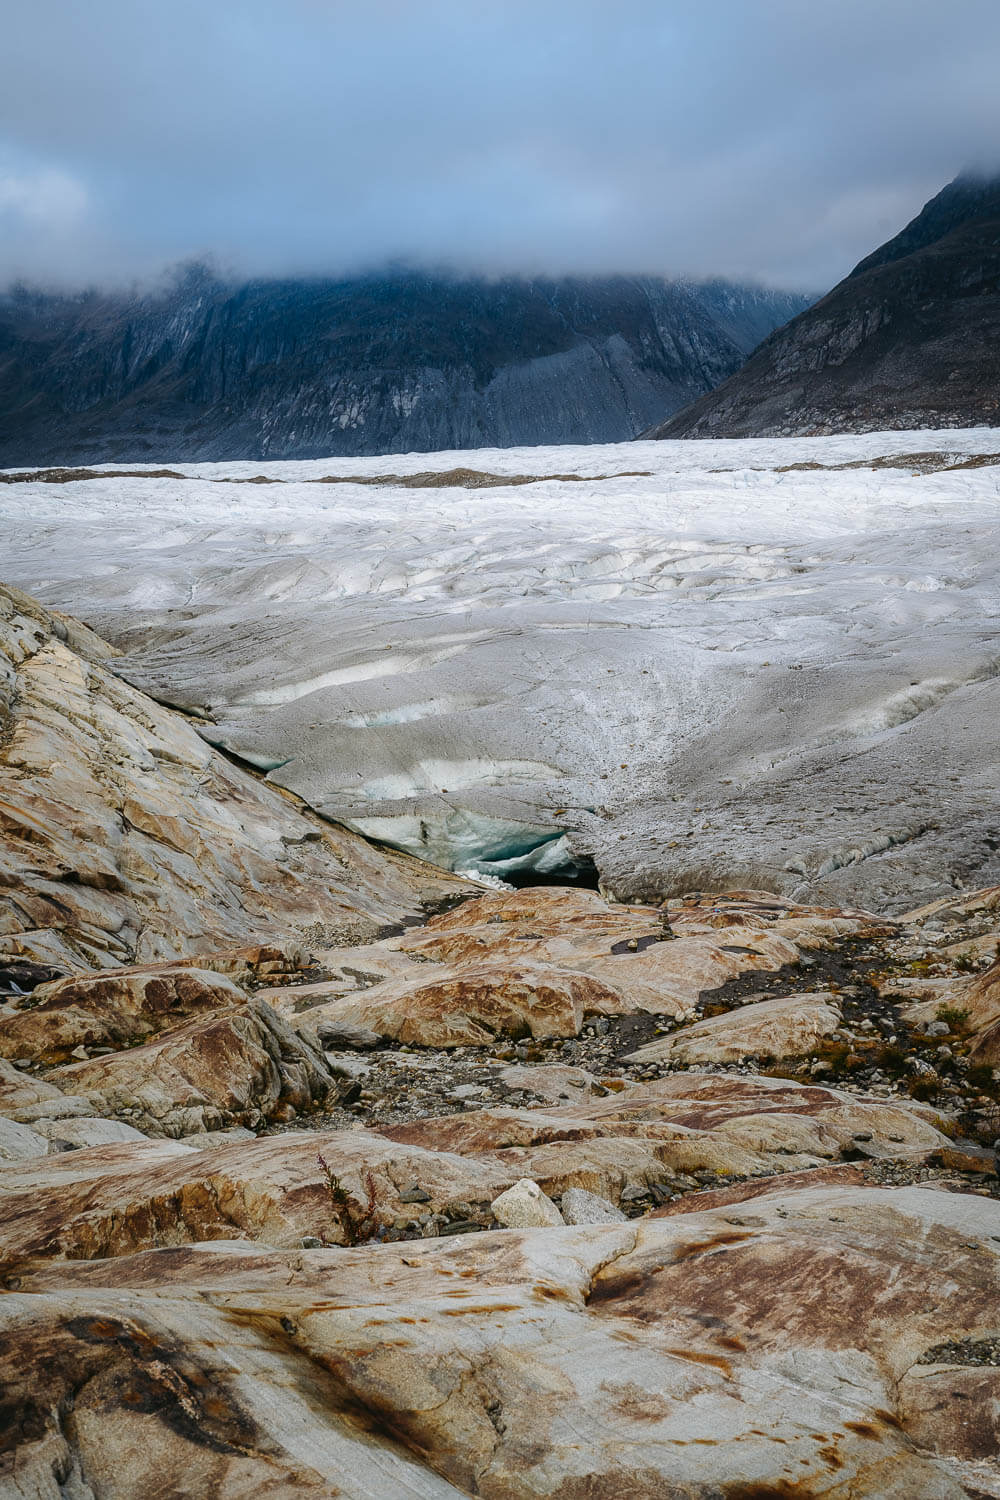 The left entrance to the Aletsch Glacier